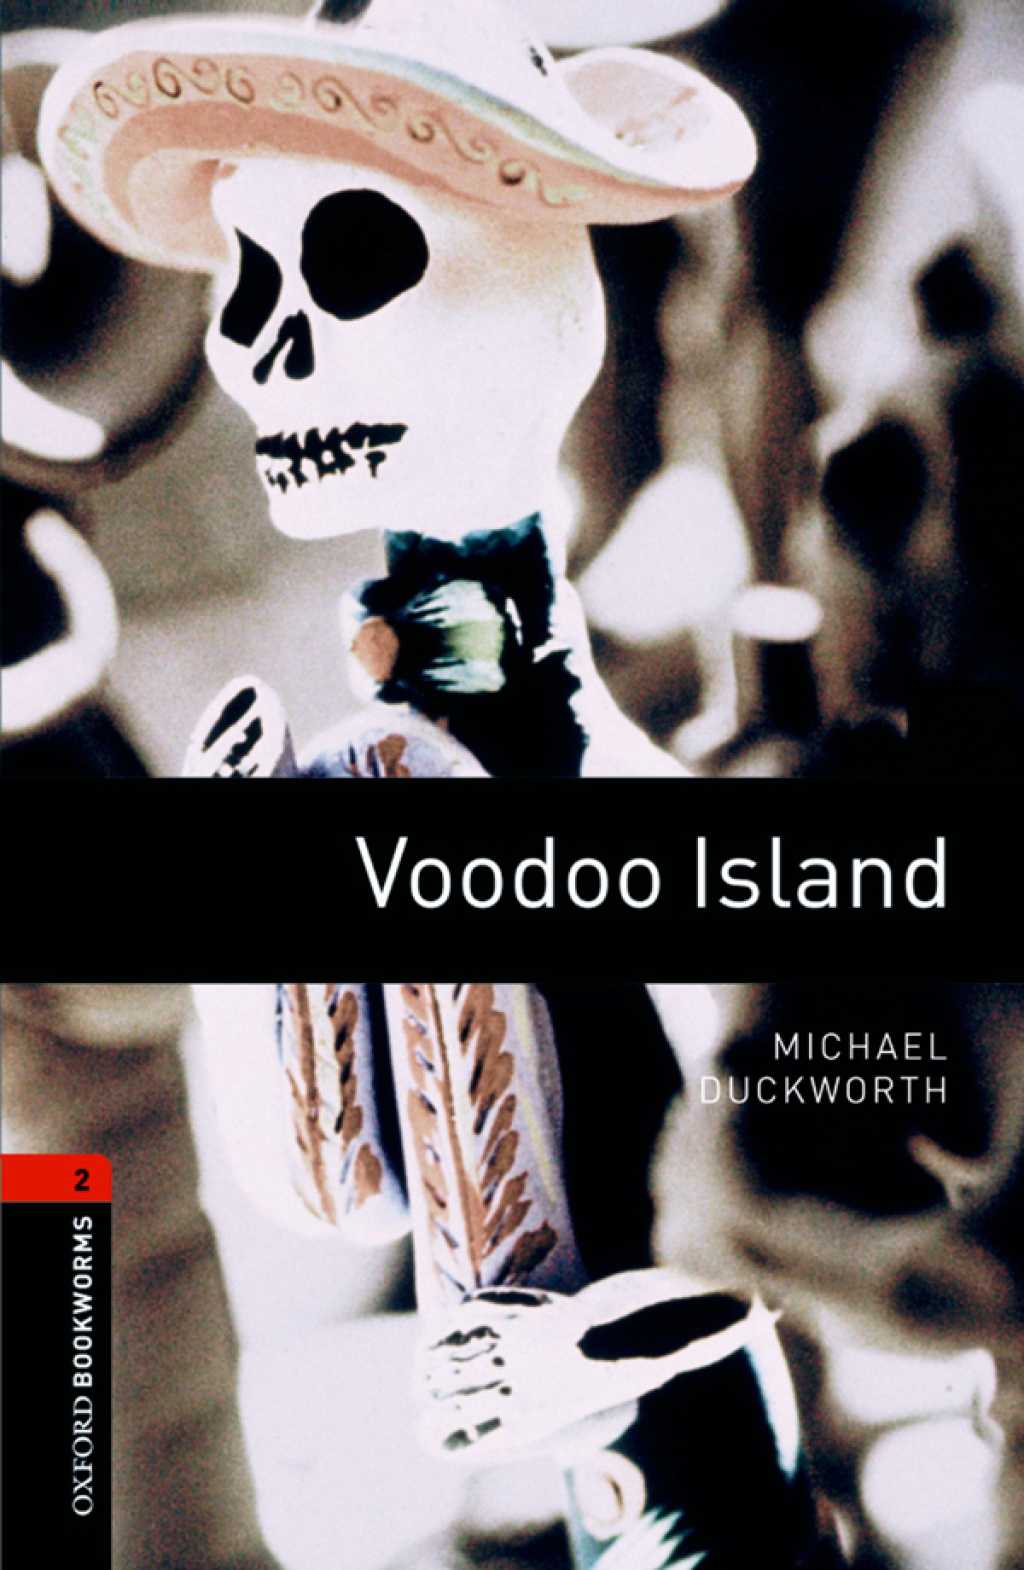 Voodoo Island Level 2 Oxford Bookworms Library - 3rd Edition (eBook Rental)